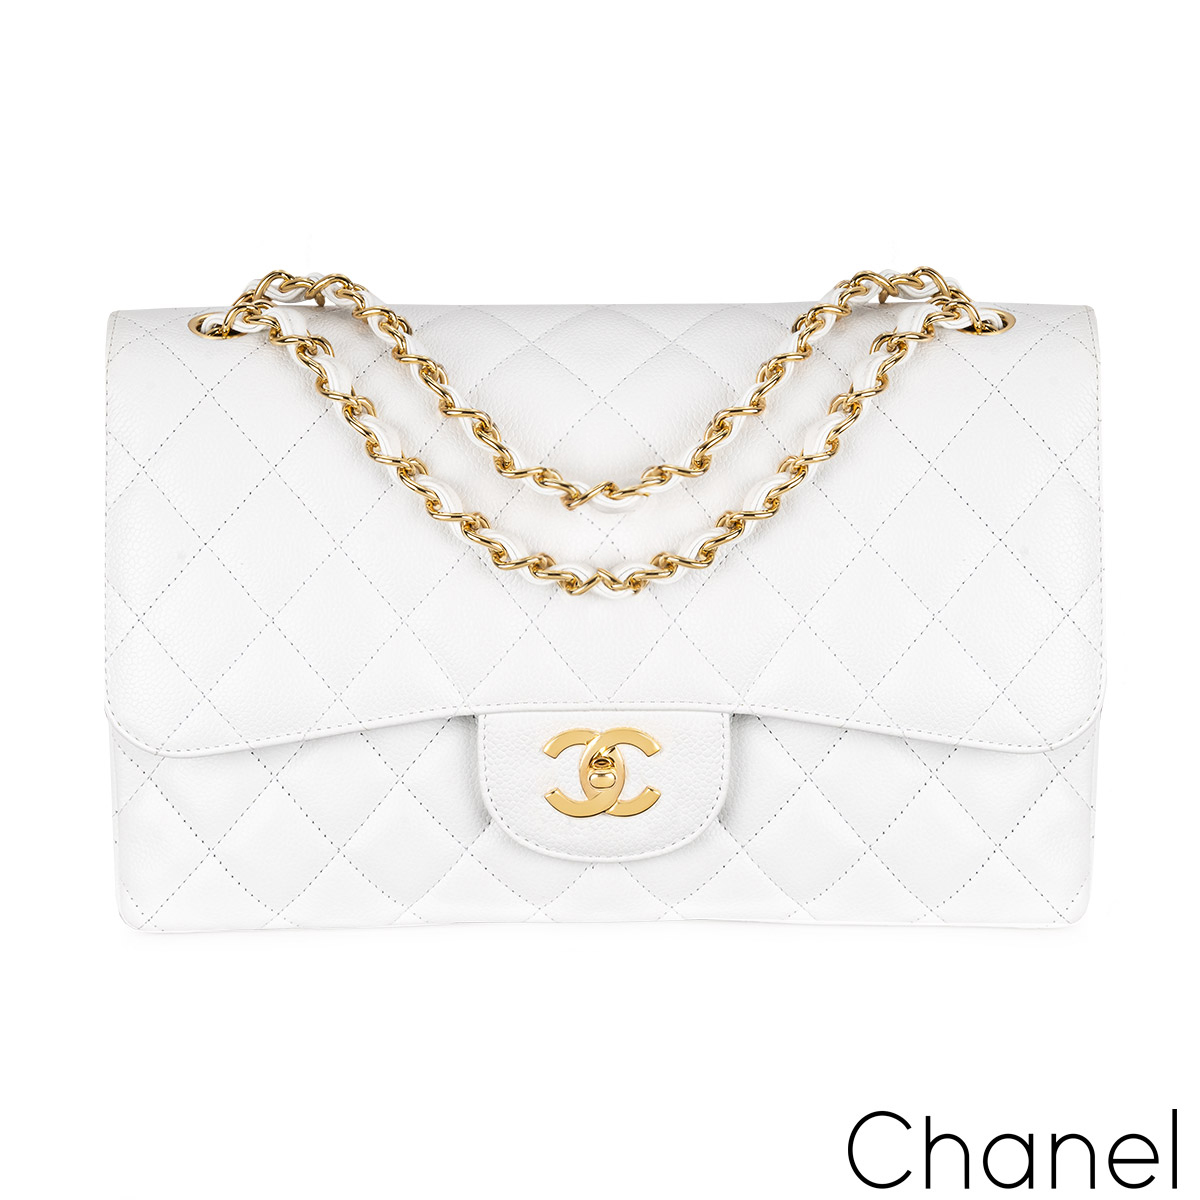 Chanel White Quilted Lambskin Leather Small Funky Town Flap Shoulder Bag  Chanel  TLC